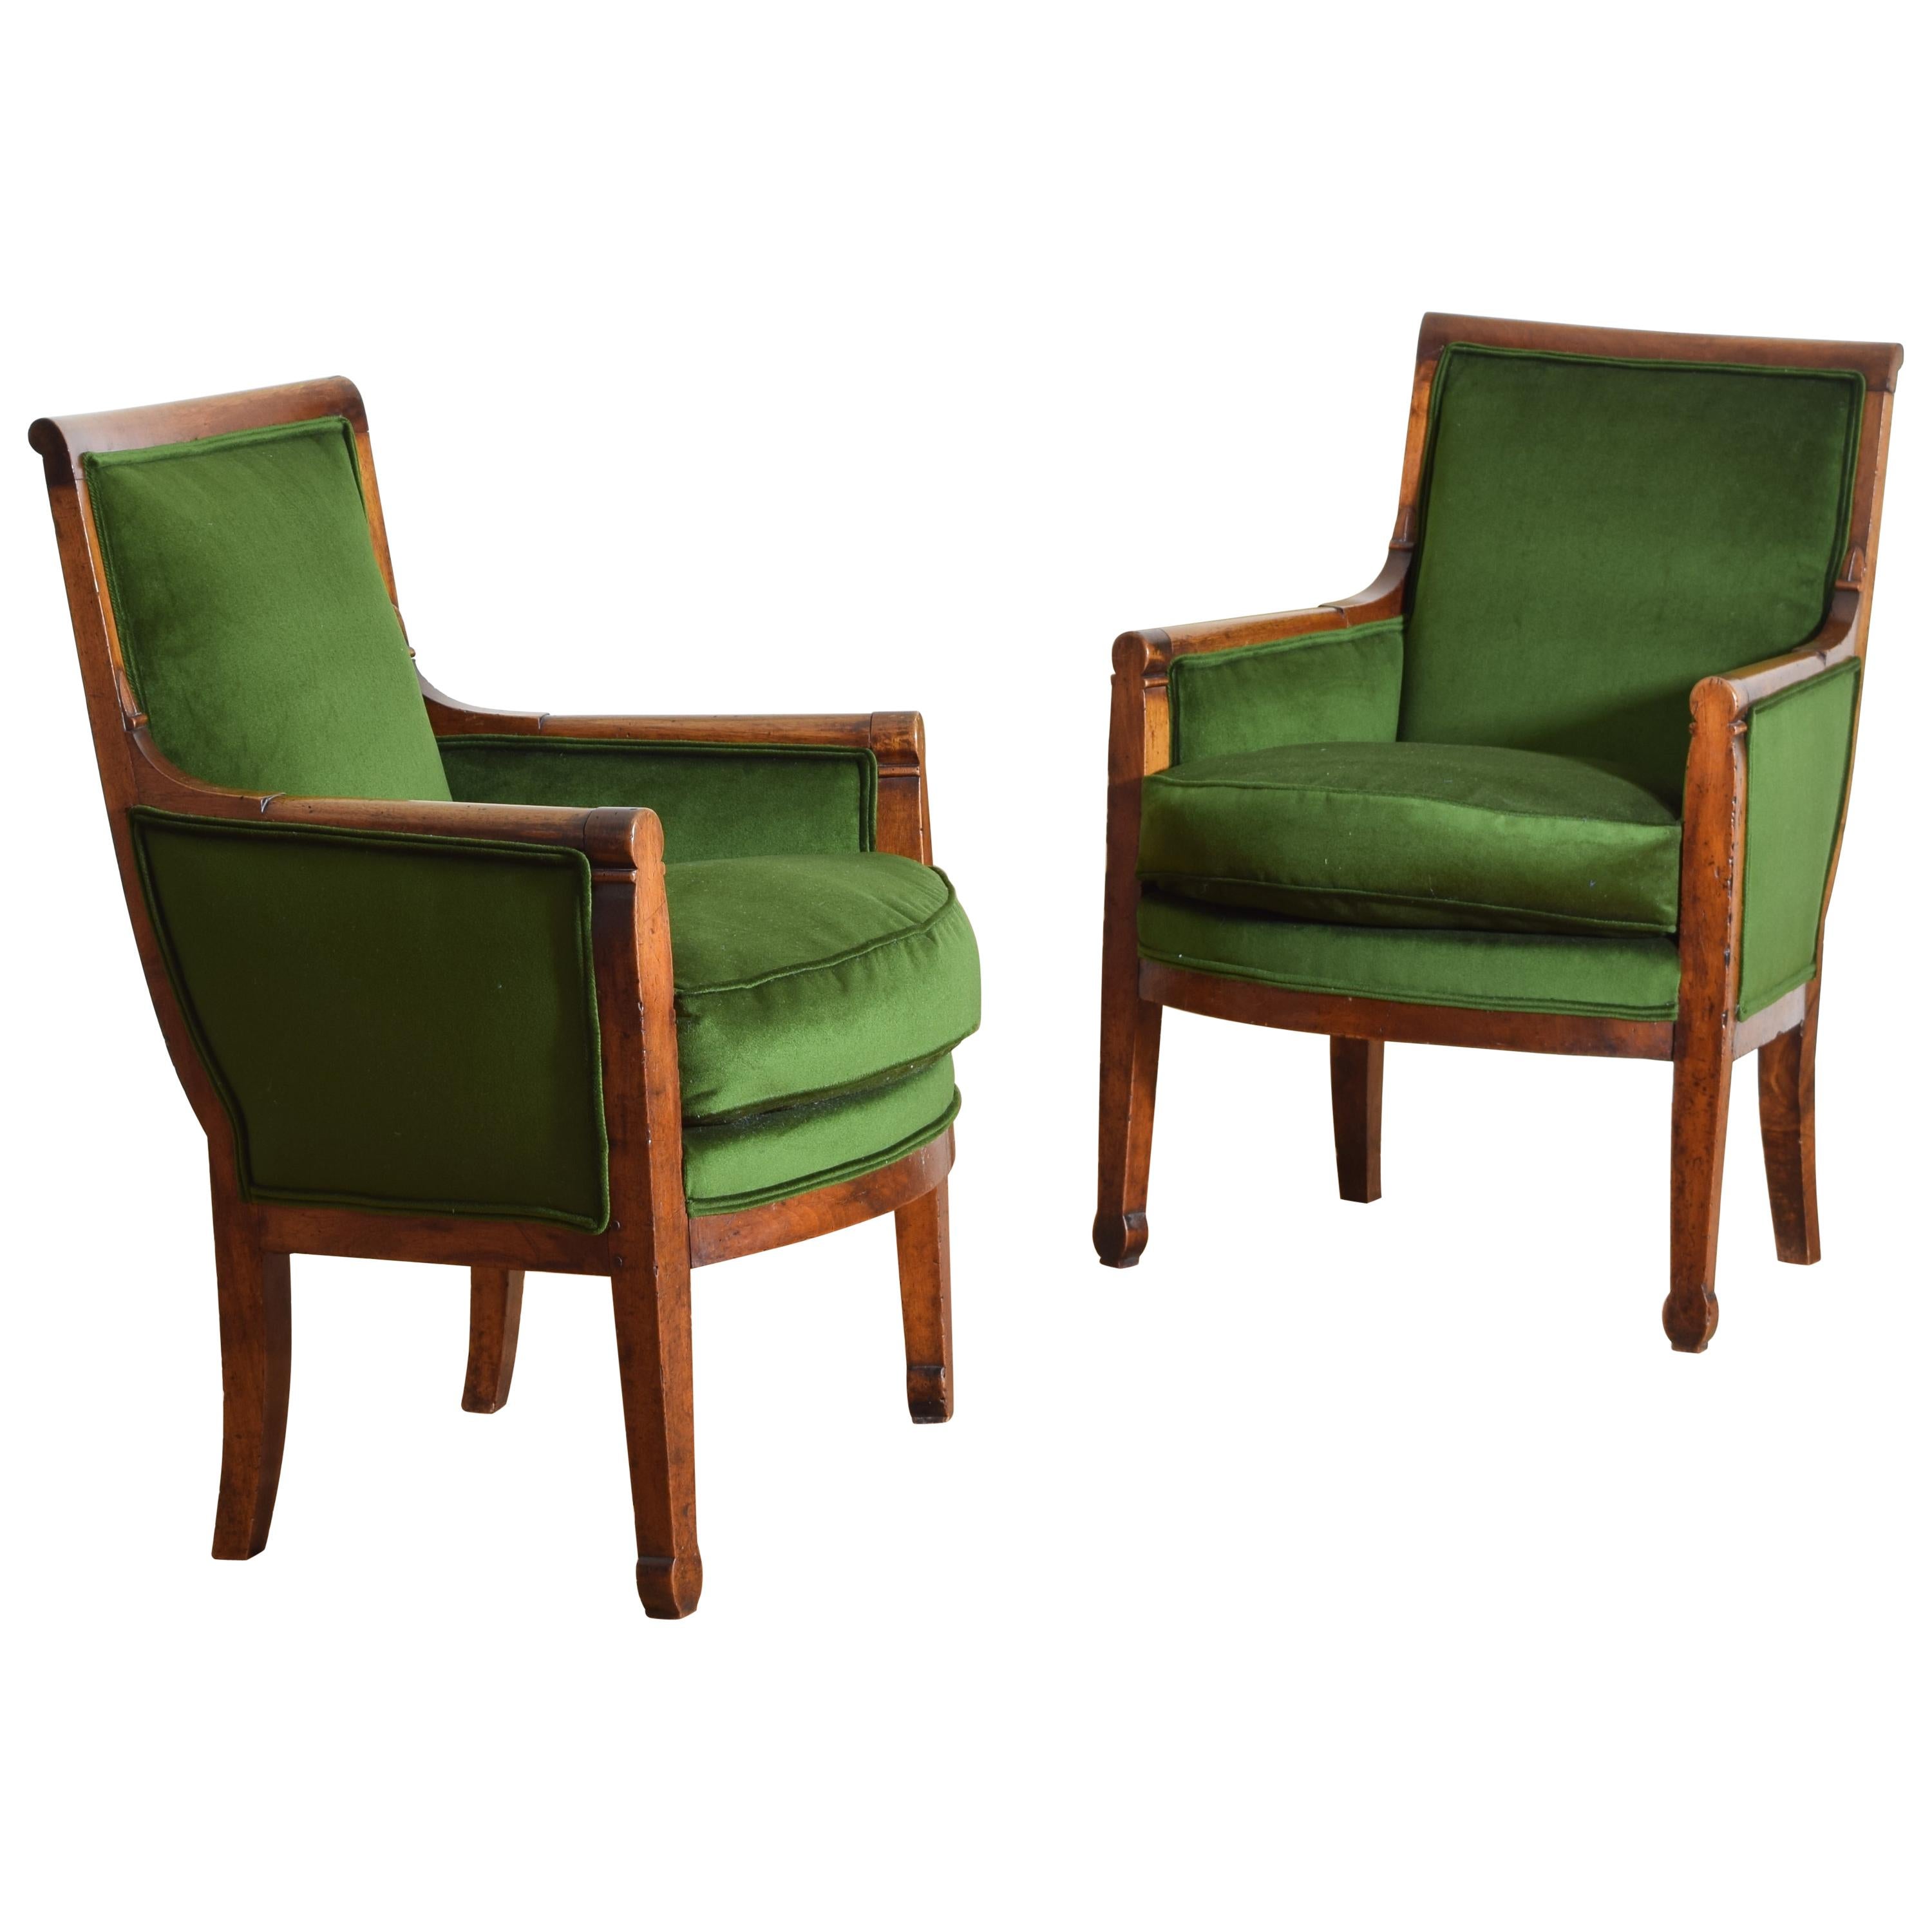 French Restauration Period Pair of Walnut and Upholstered Bergeres, circa 1825